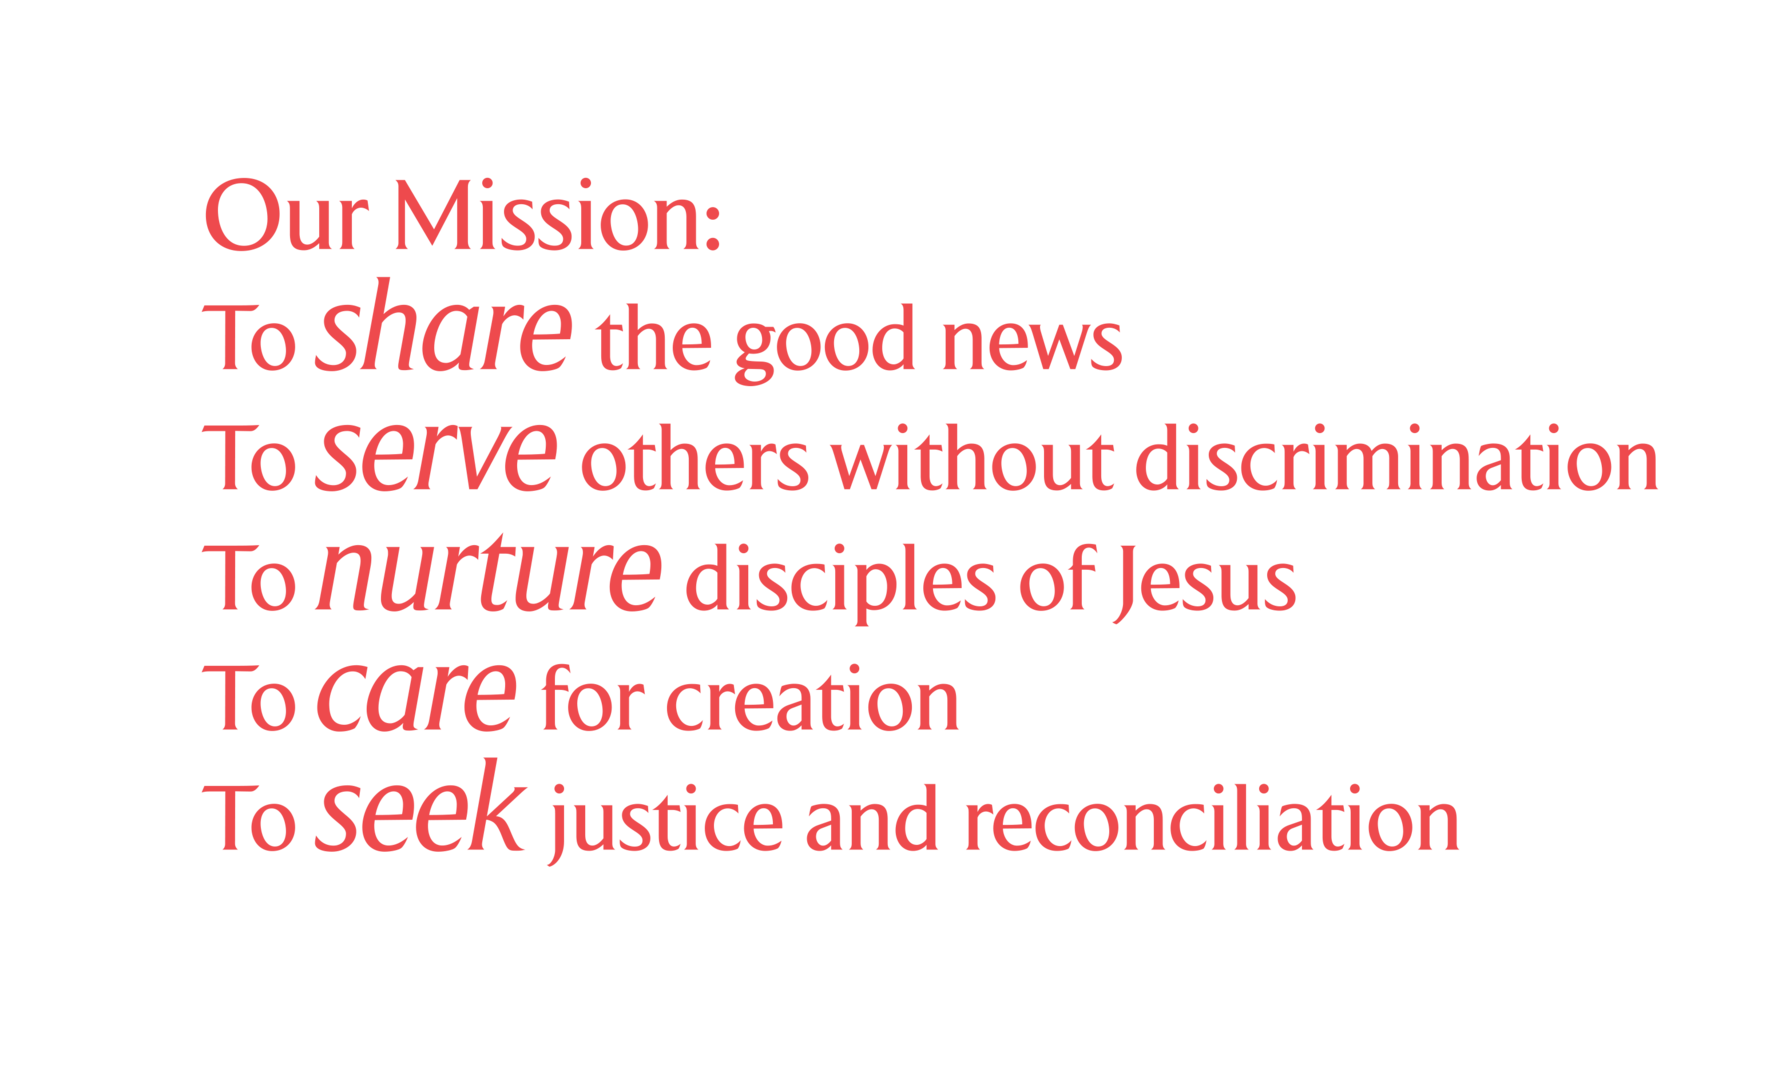 Who We Are & Our Mission Statement